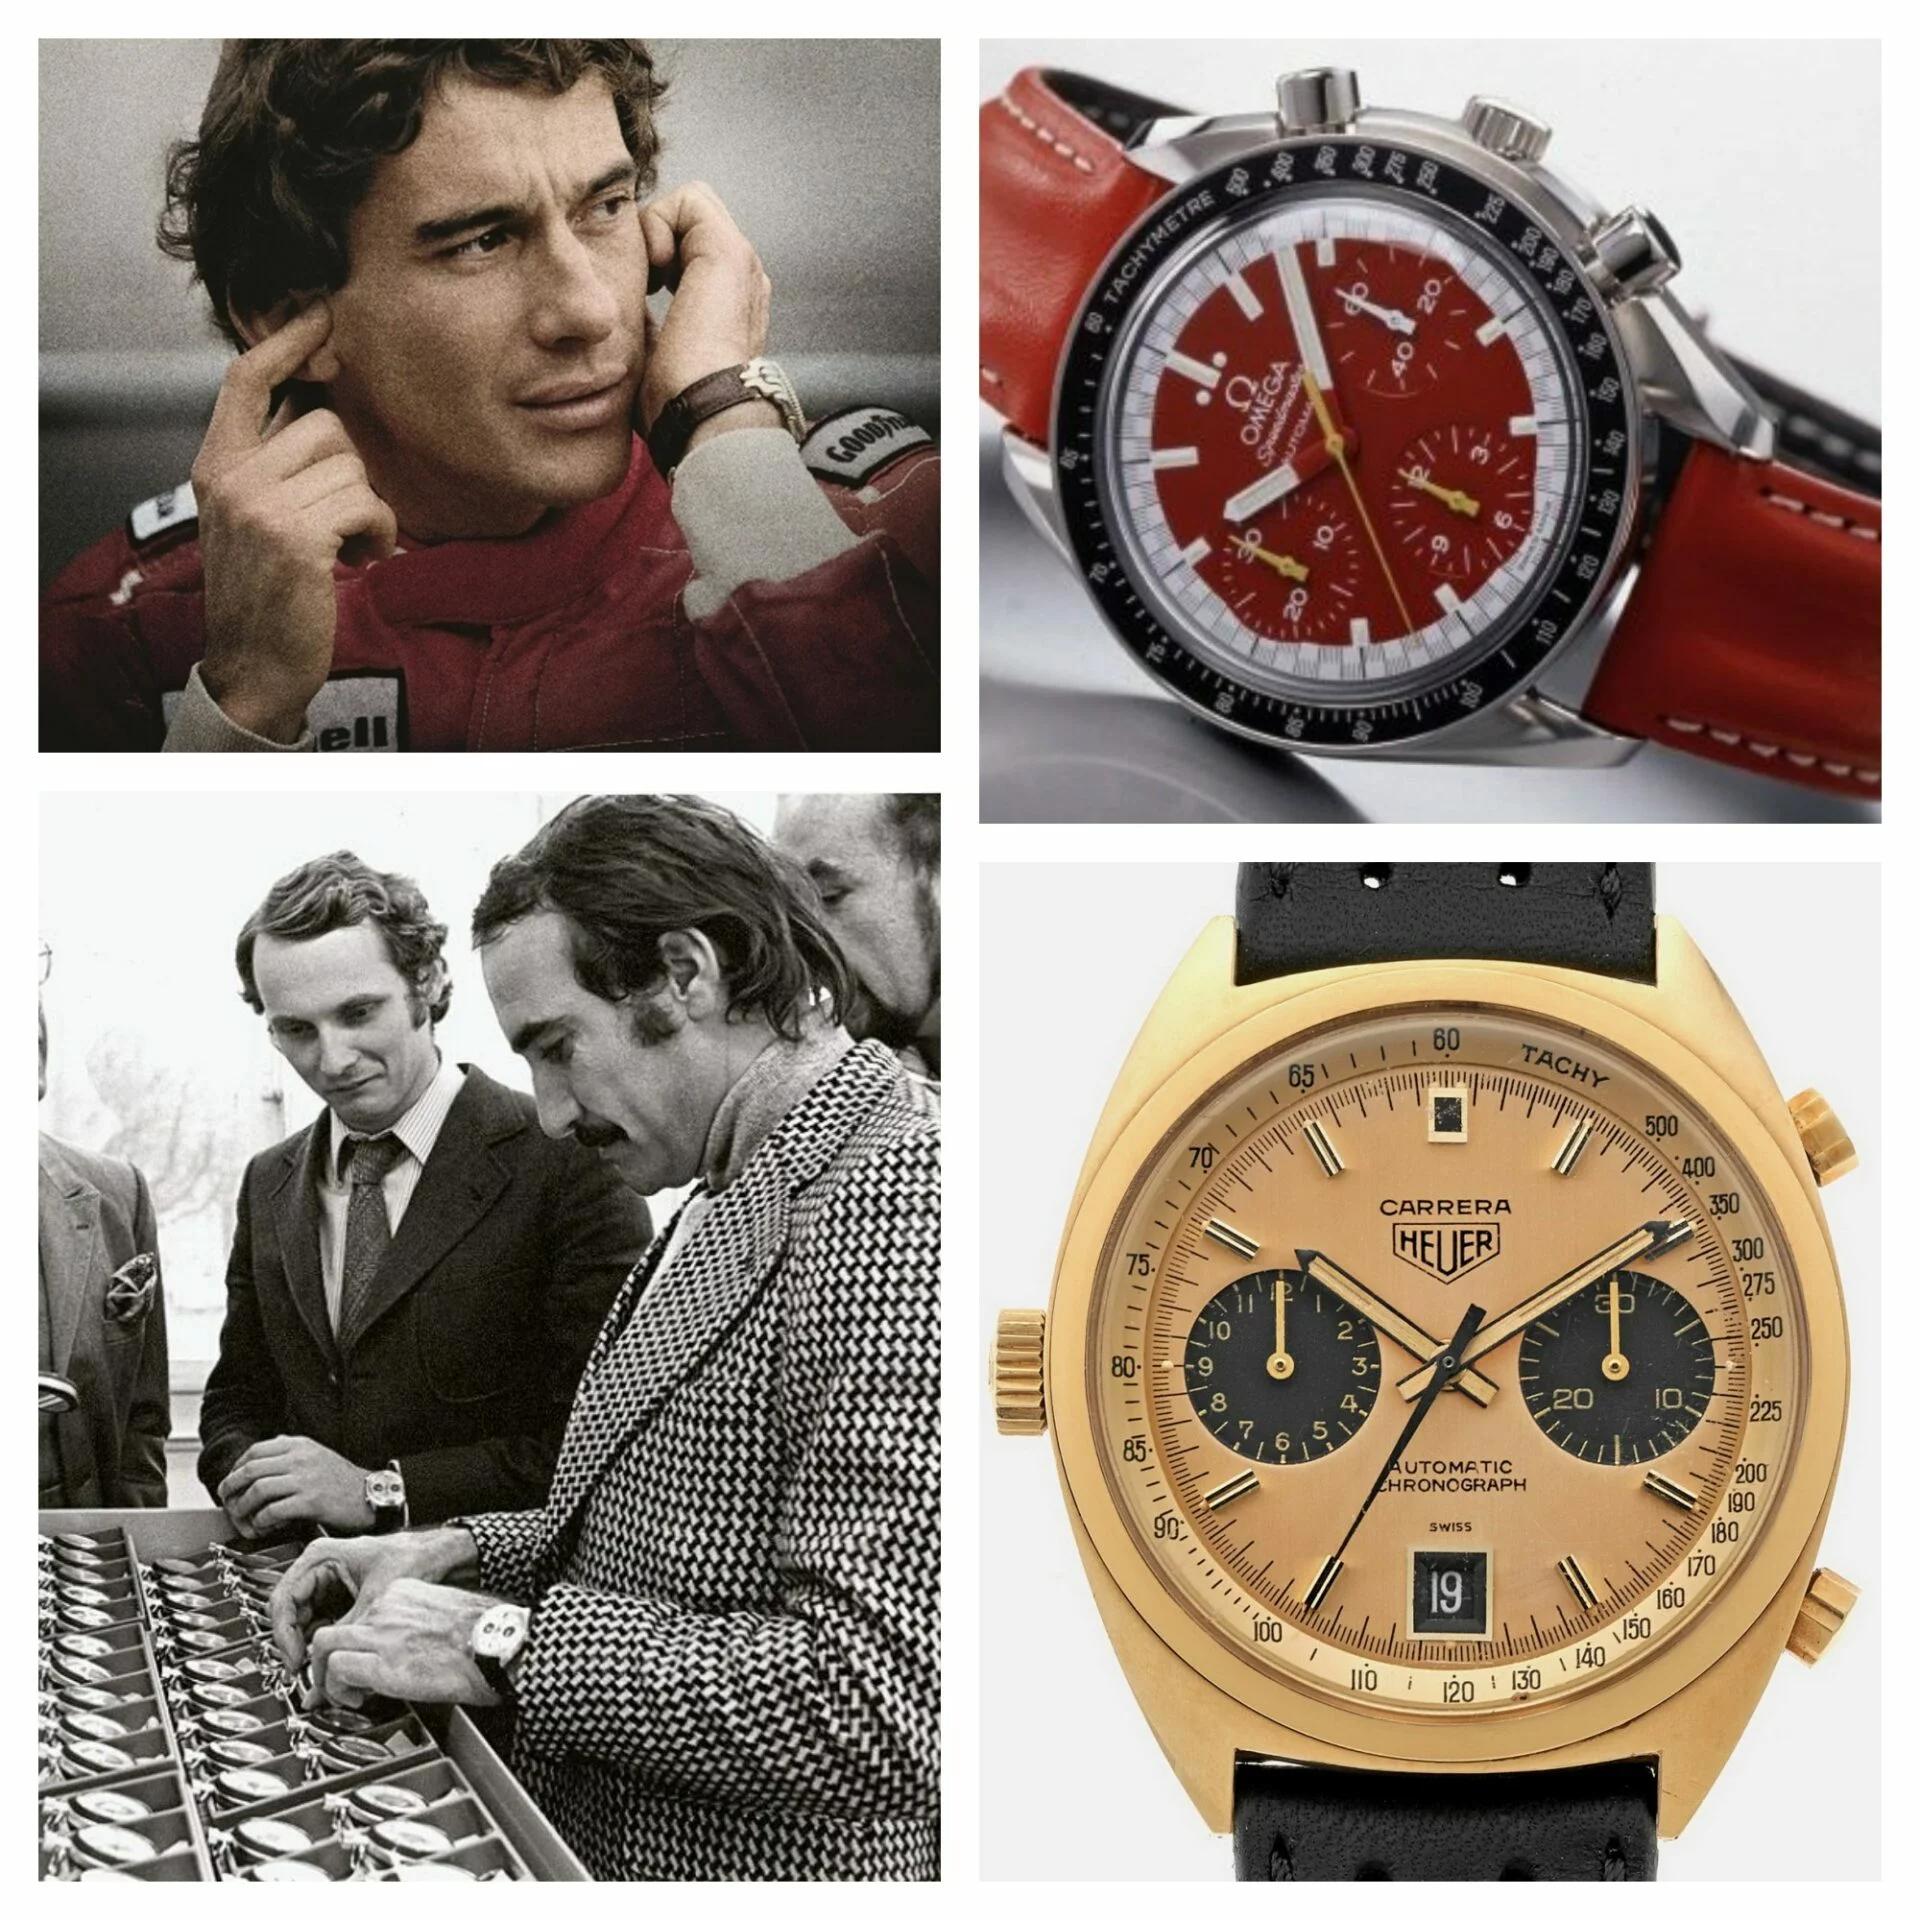 5 of the coolest vintage watches in Formula 1